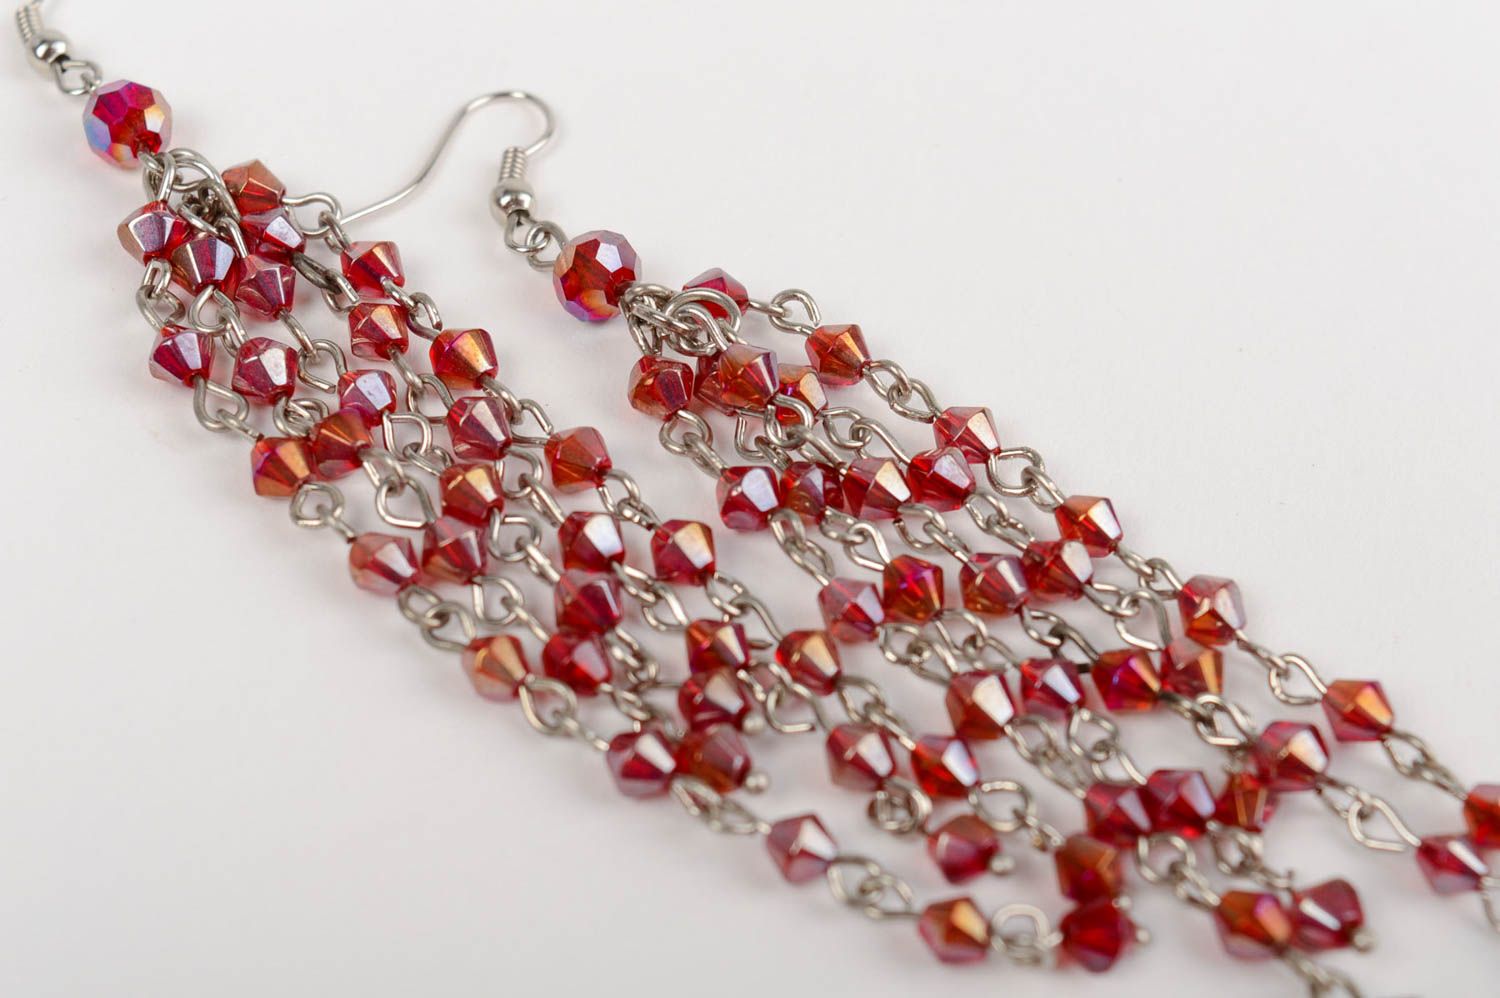 Crystal earrings with charms handmade accessory with beautiful red charms photo 5